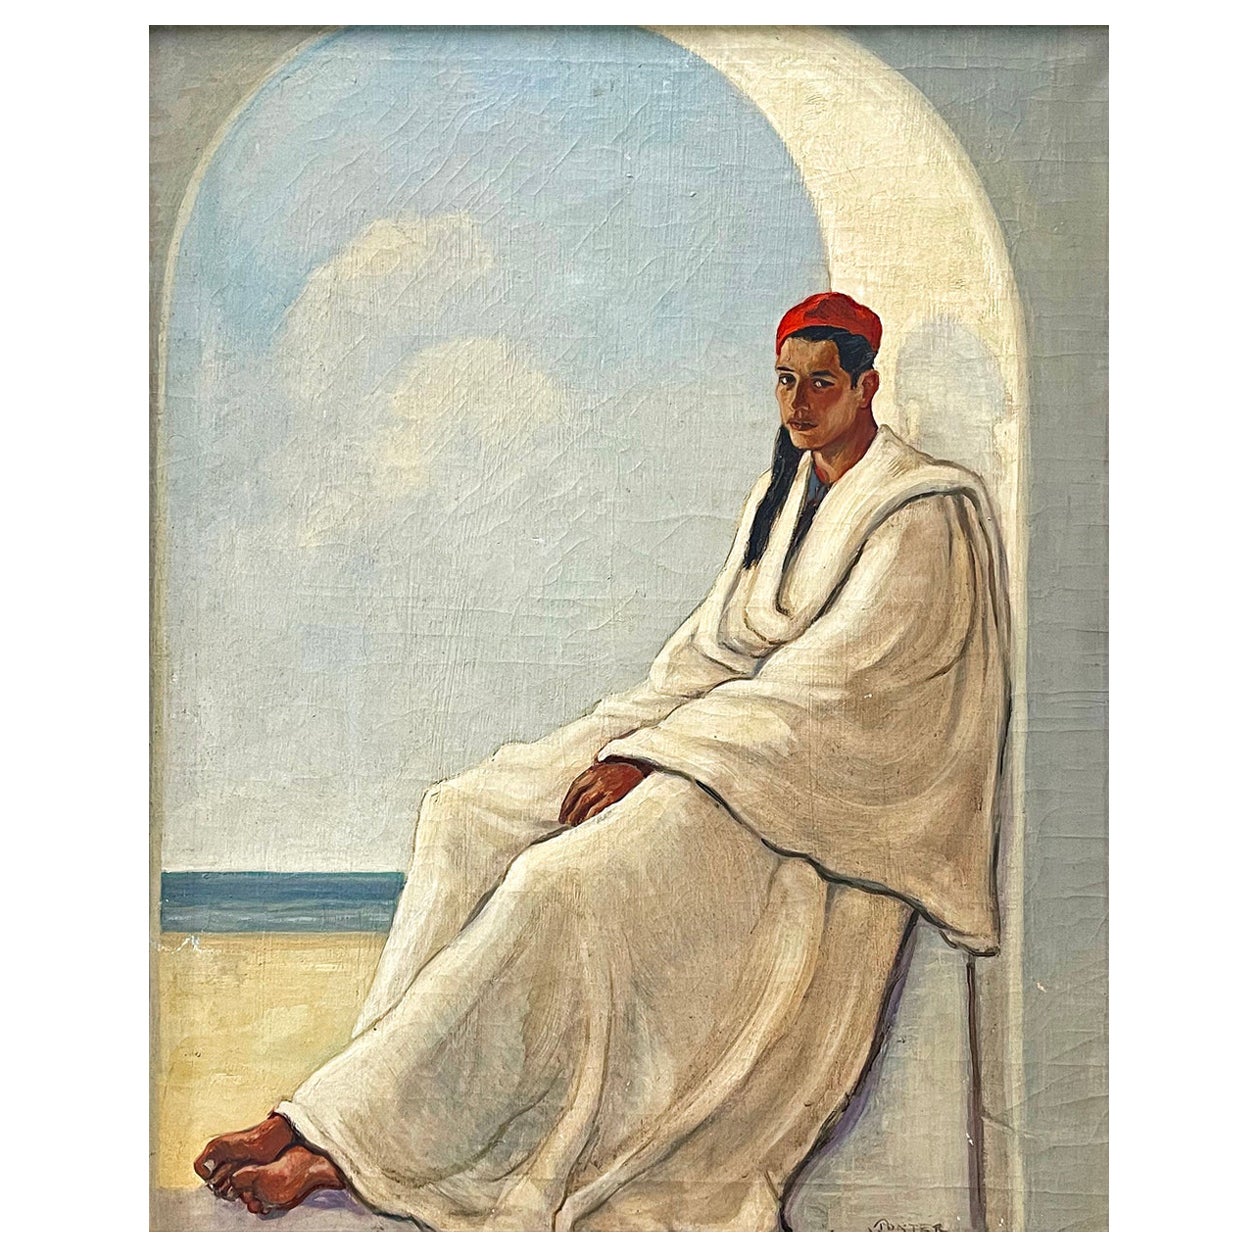 "Tunisian Young Man with Chechia," Striking Oil Painting by Woodruff, 1930s